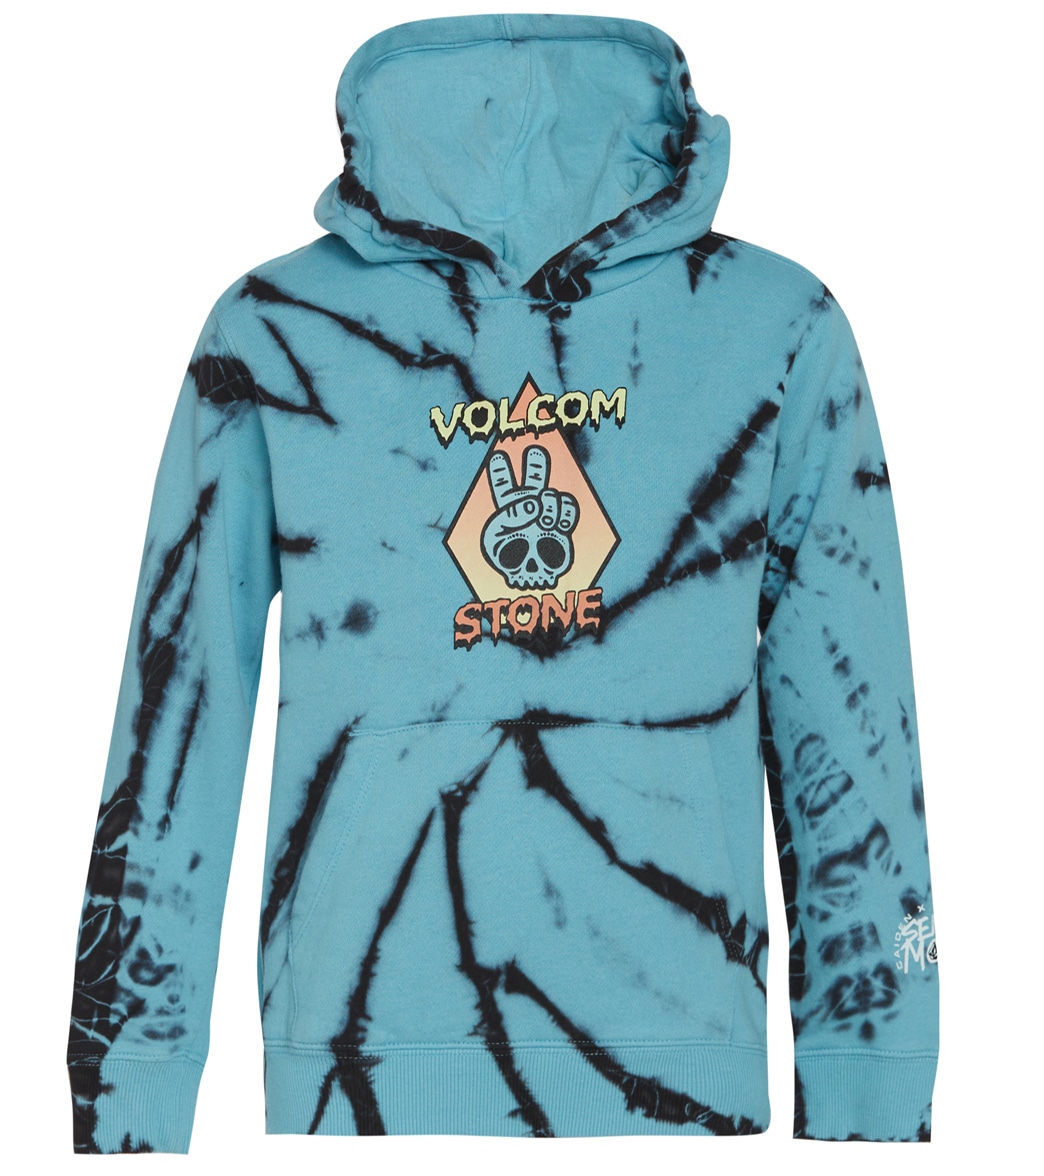 Volcom Boys' Caiden Dye Pullover Hoodie Toddler - Pale Aqua 4T Cotton/Polyester - Swimoutlet.com